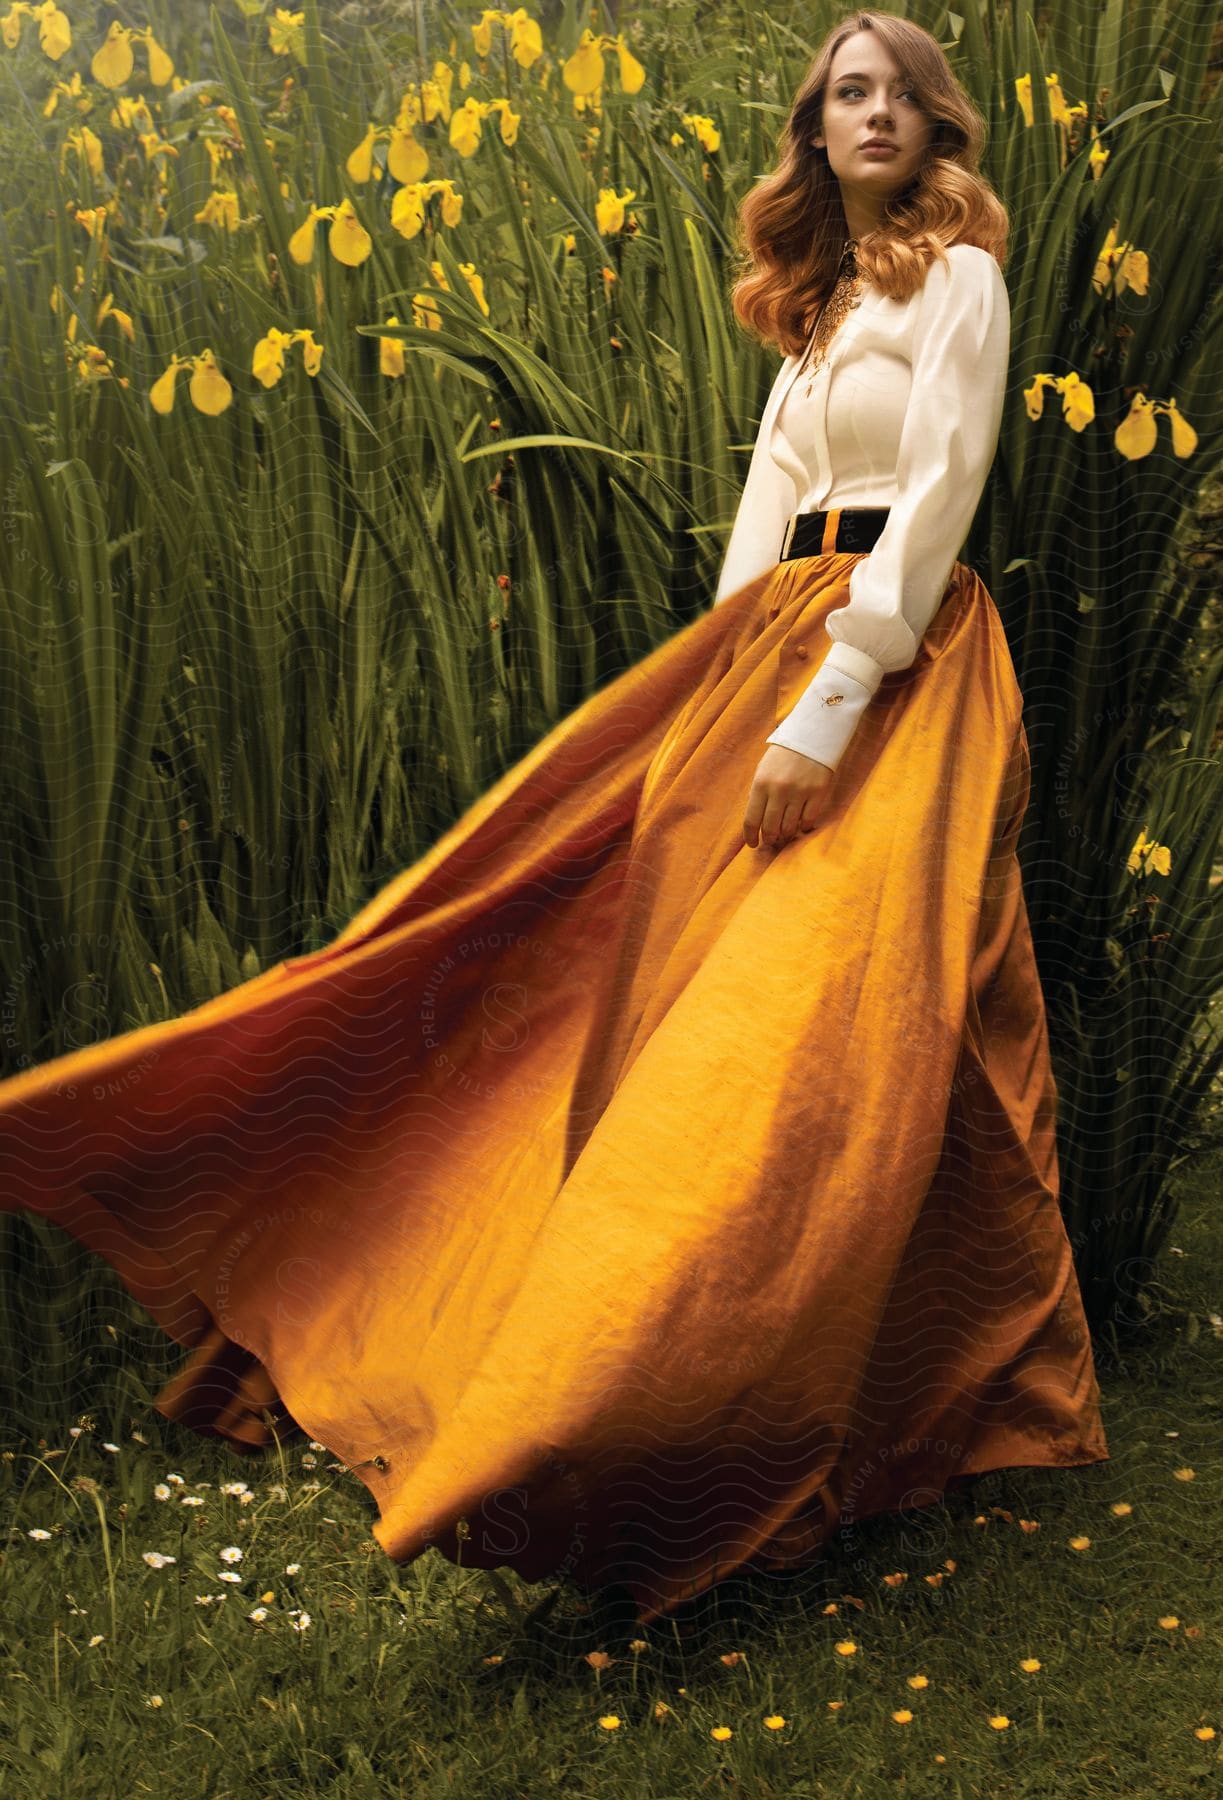 A woman wearing a yellow oversized dress poses in a field of yellow flowers